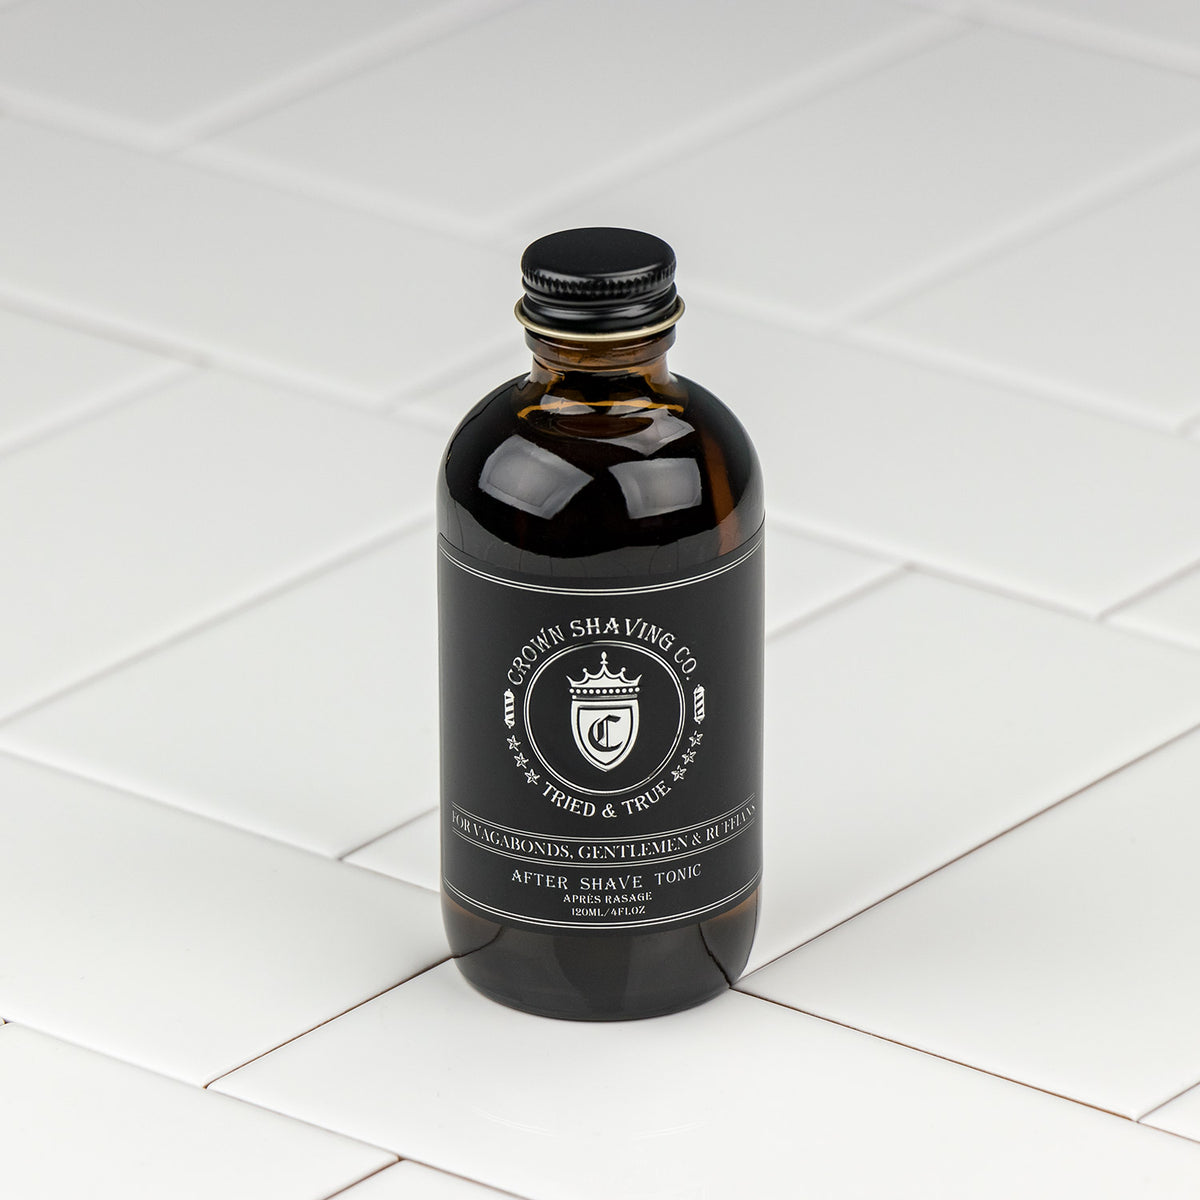 Crown Shaving Co. Aftershave Tonic